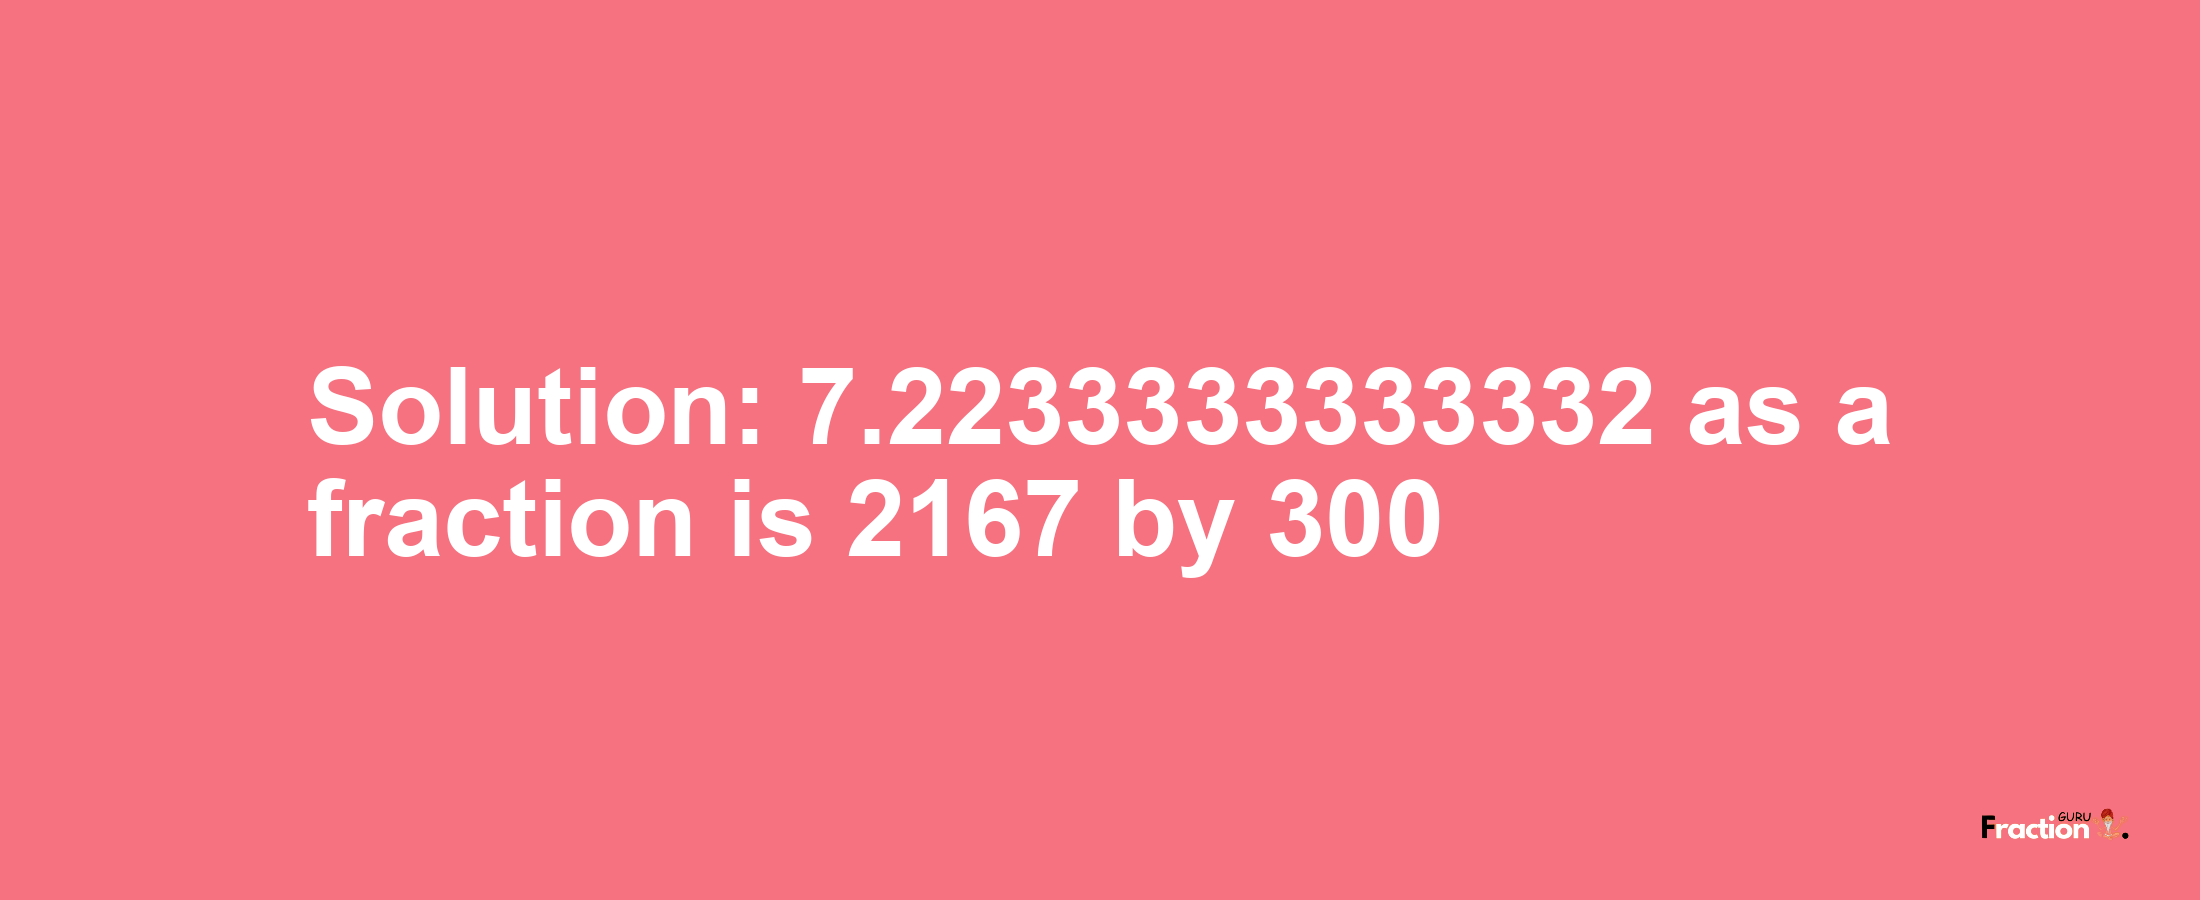 Solution:7.2233333333332 as a fraction is 2167/300